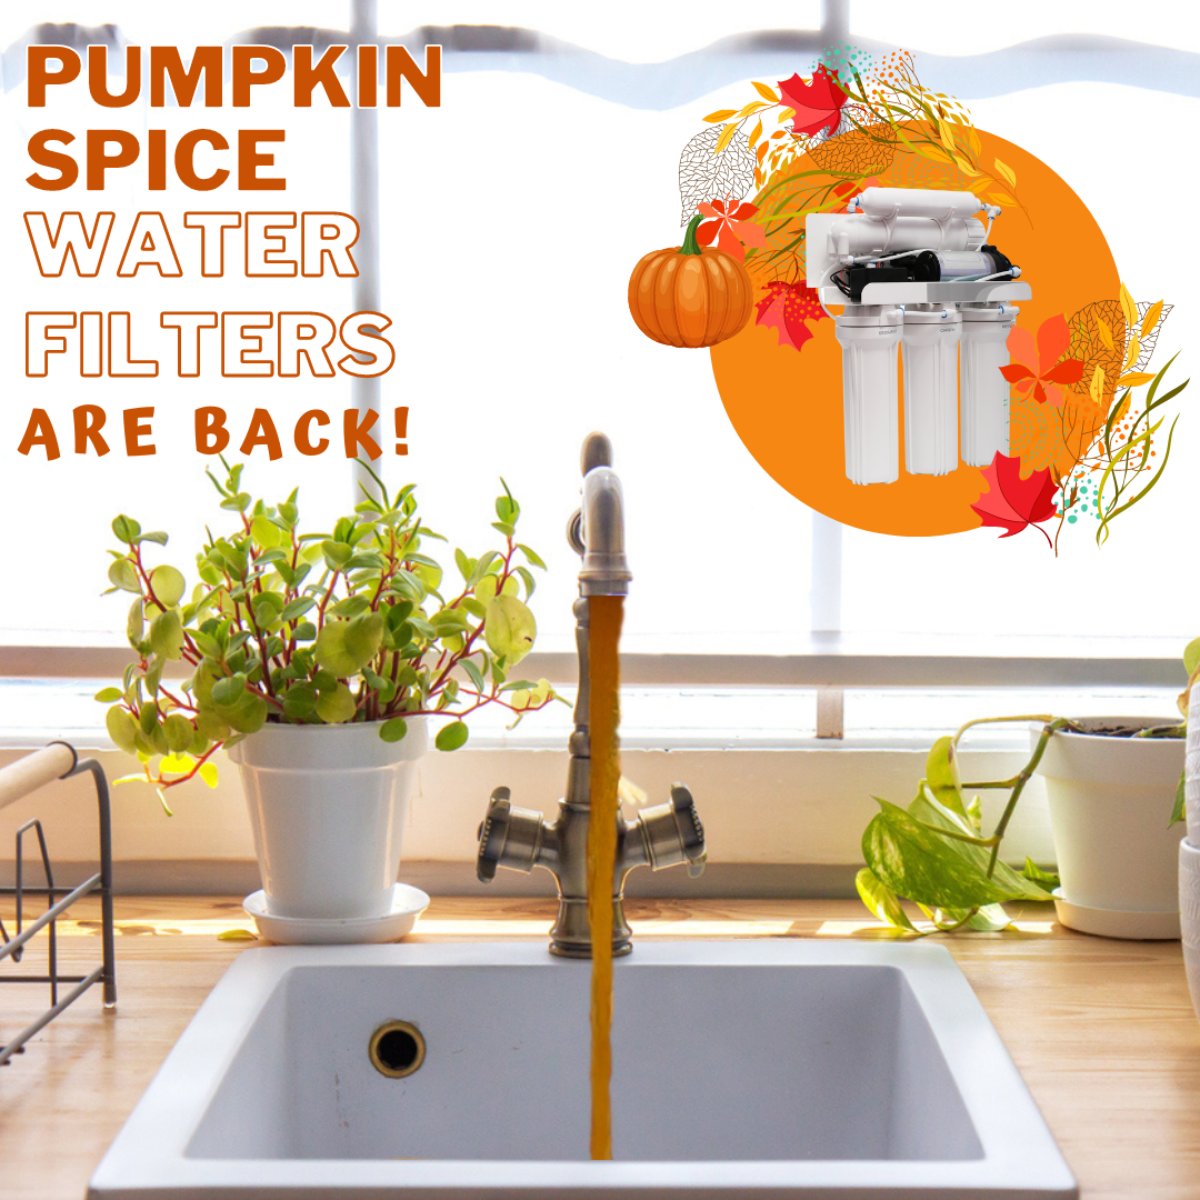 Great news! Our pumpkin spice water filter cartridges are back!  Just kidding. That's not a real thing--but maybe it should be? Happy first day of fall!   #RicksPlumbingServiceInc #plumbing #plumber #heating #DrainCleaning #HydroJetting #WaterHeater #WaterLeakDetection